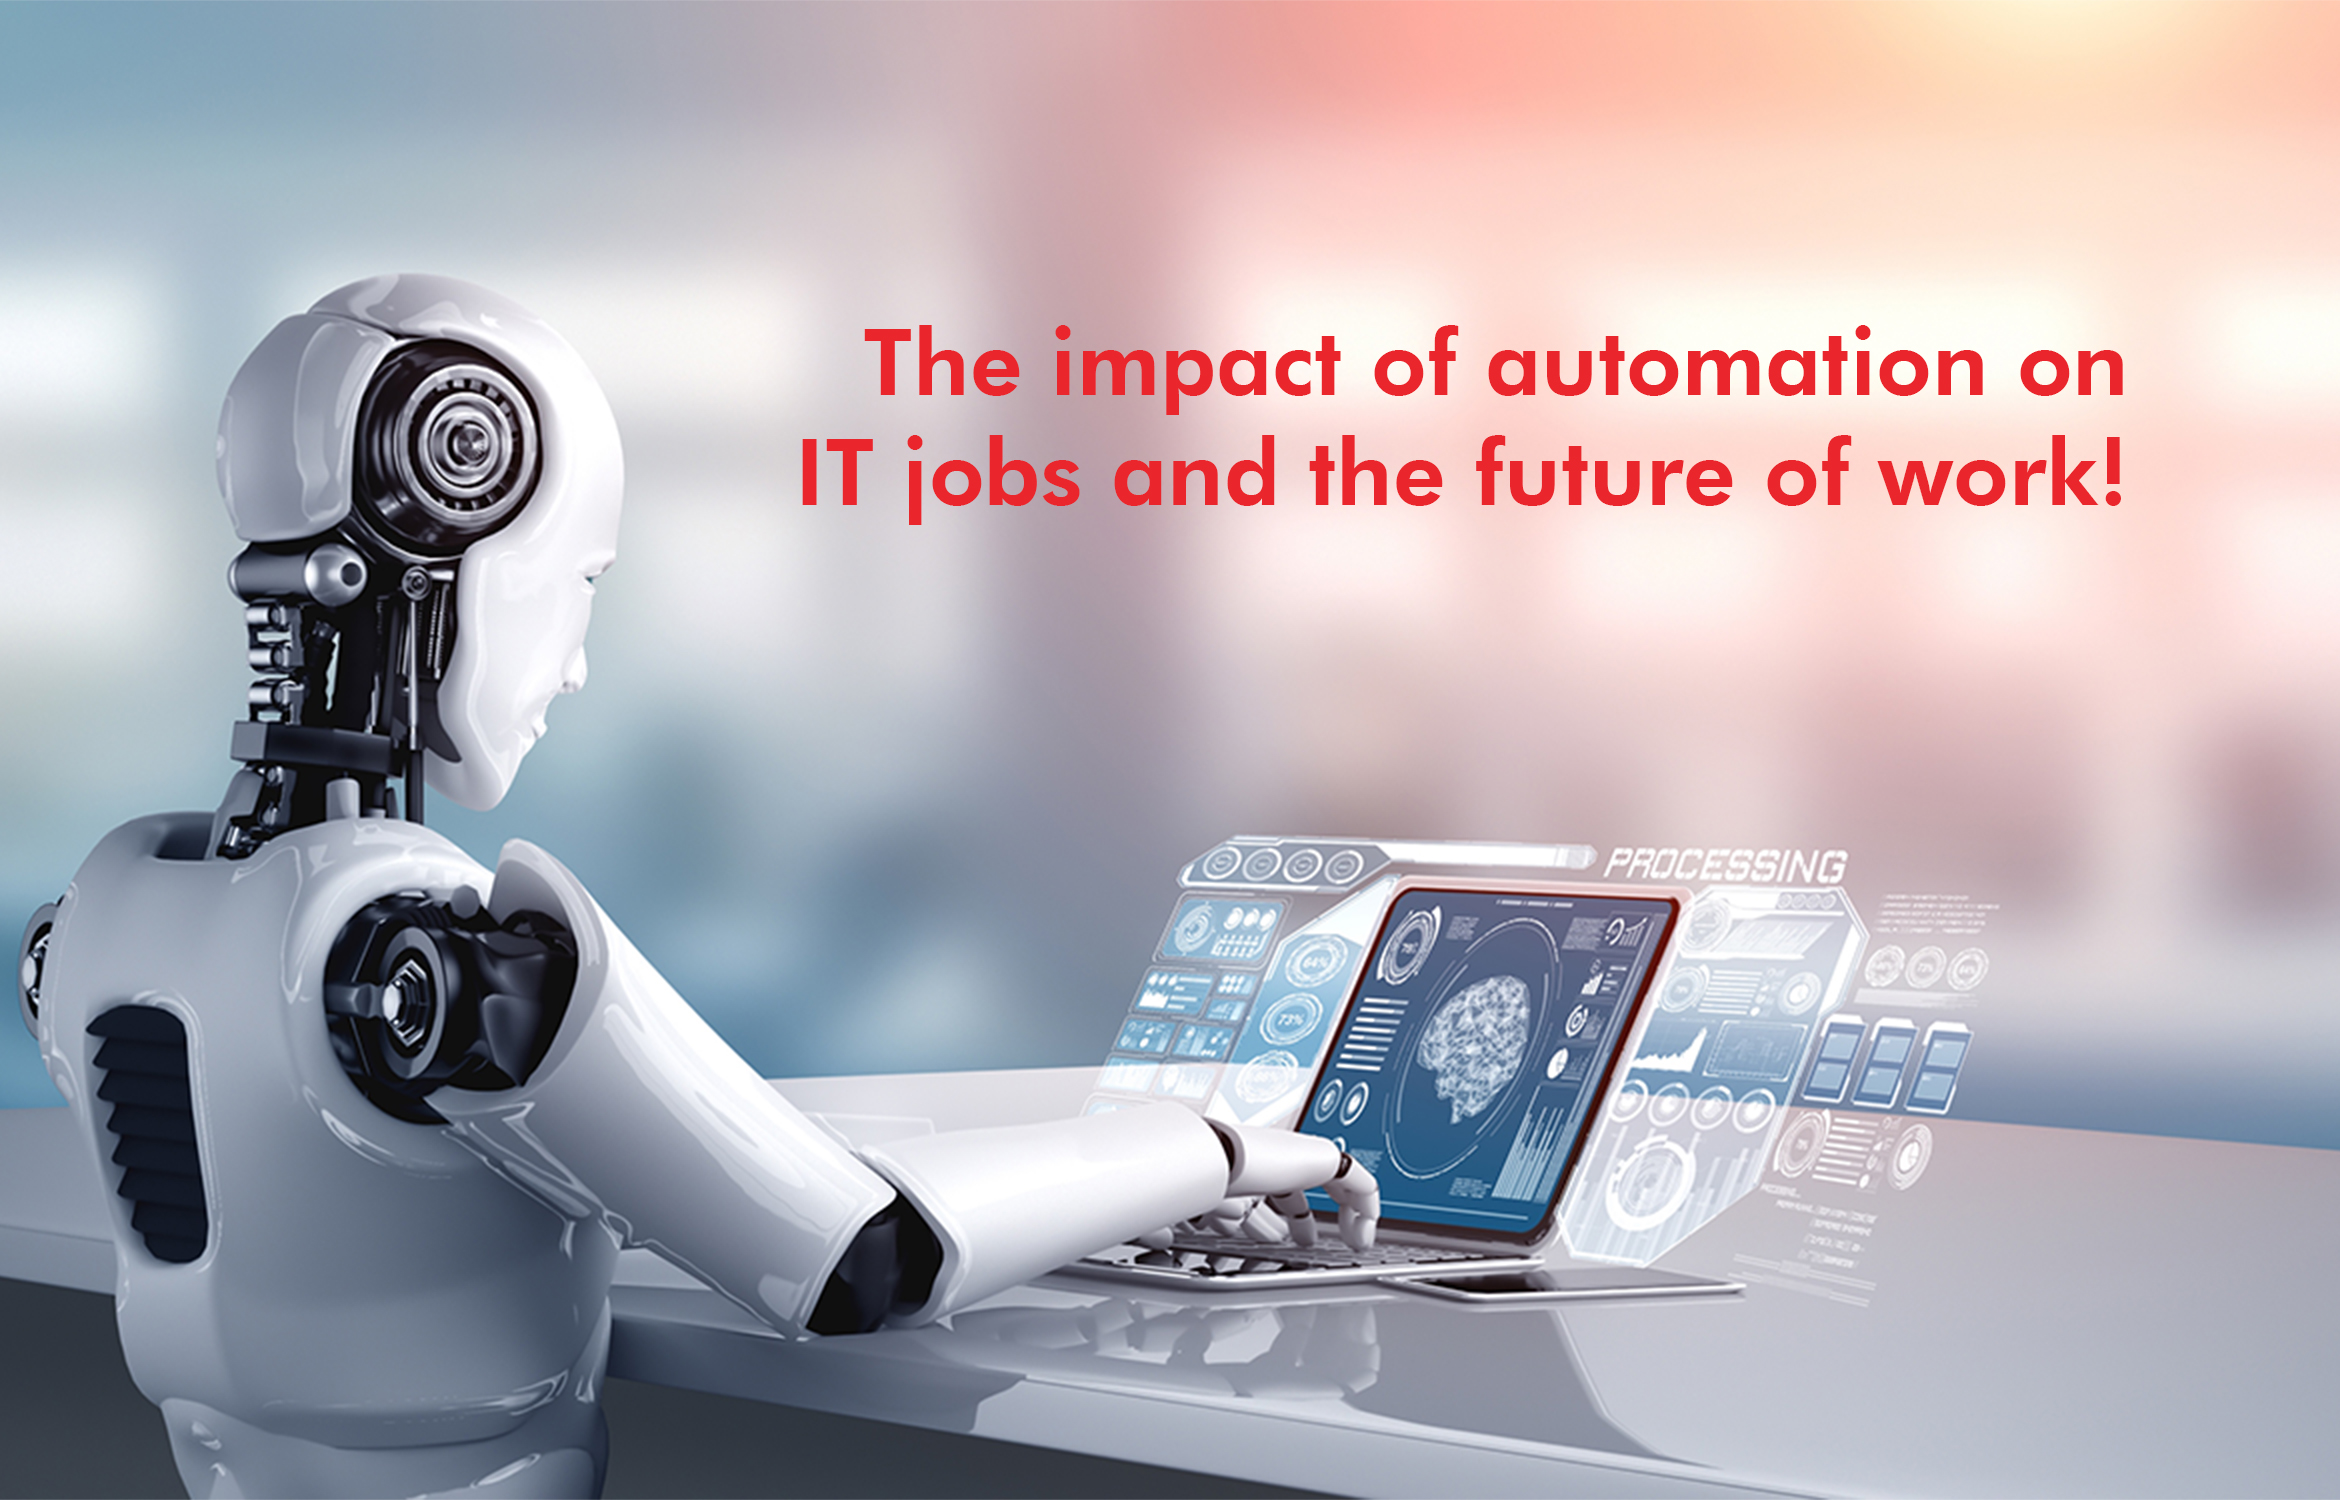 The impact of automation on IT jobs and the future of work